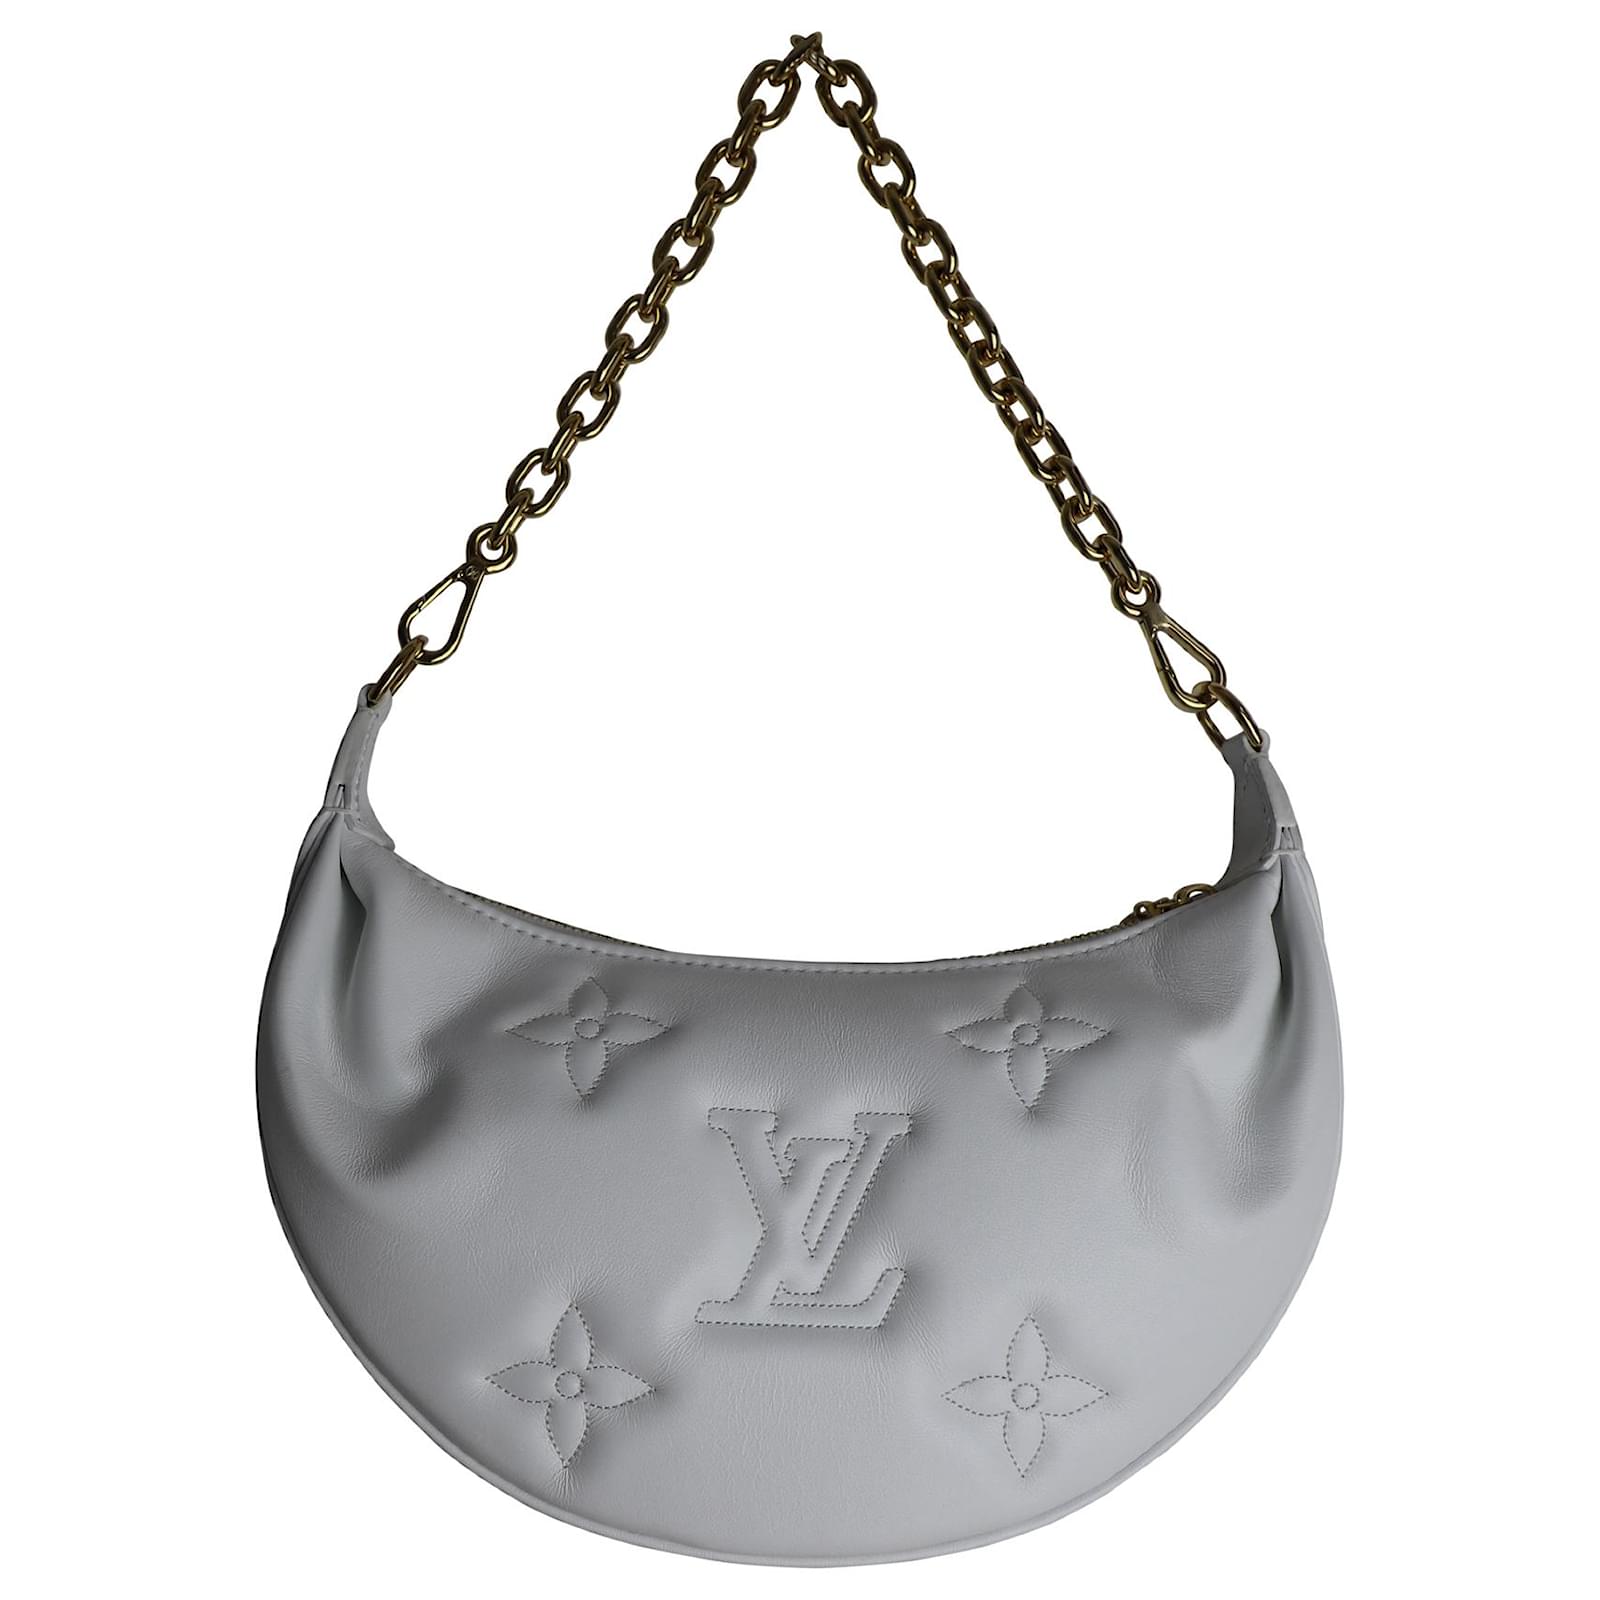 Louis Vuitton Over The Moon in White Calf Leather Pony-style